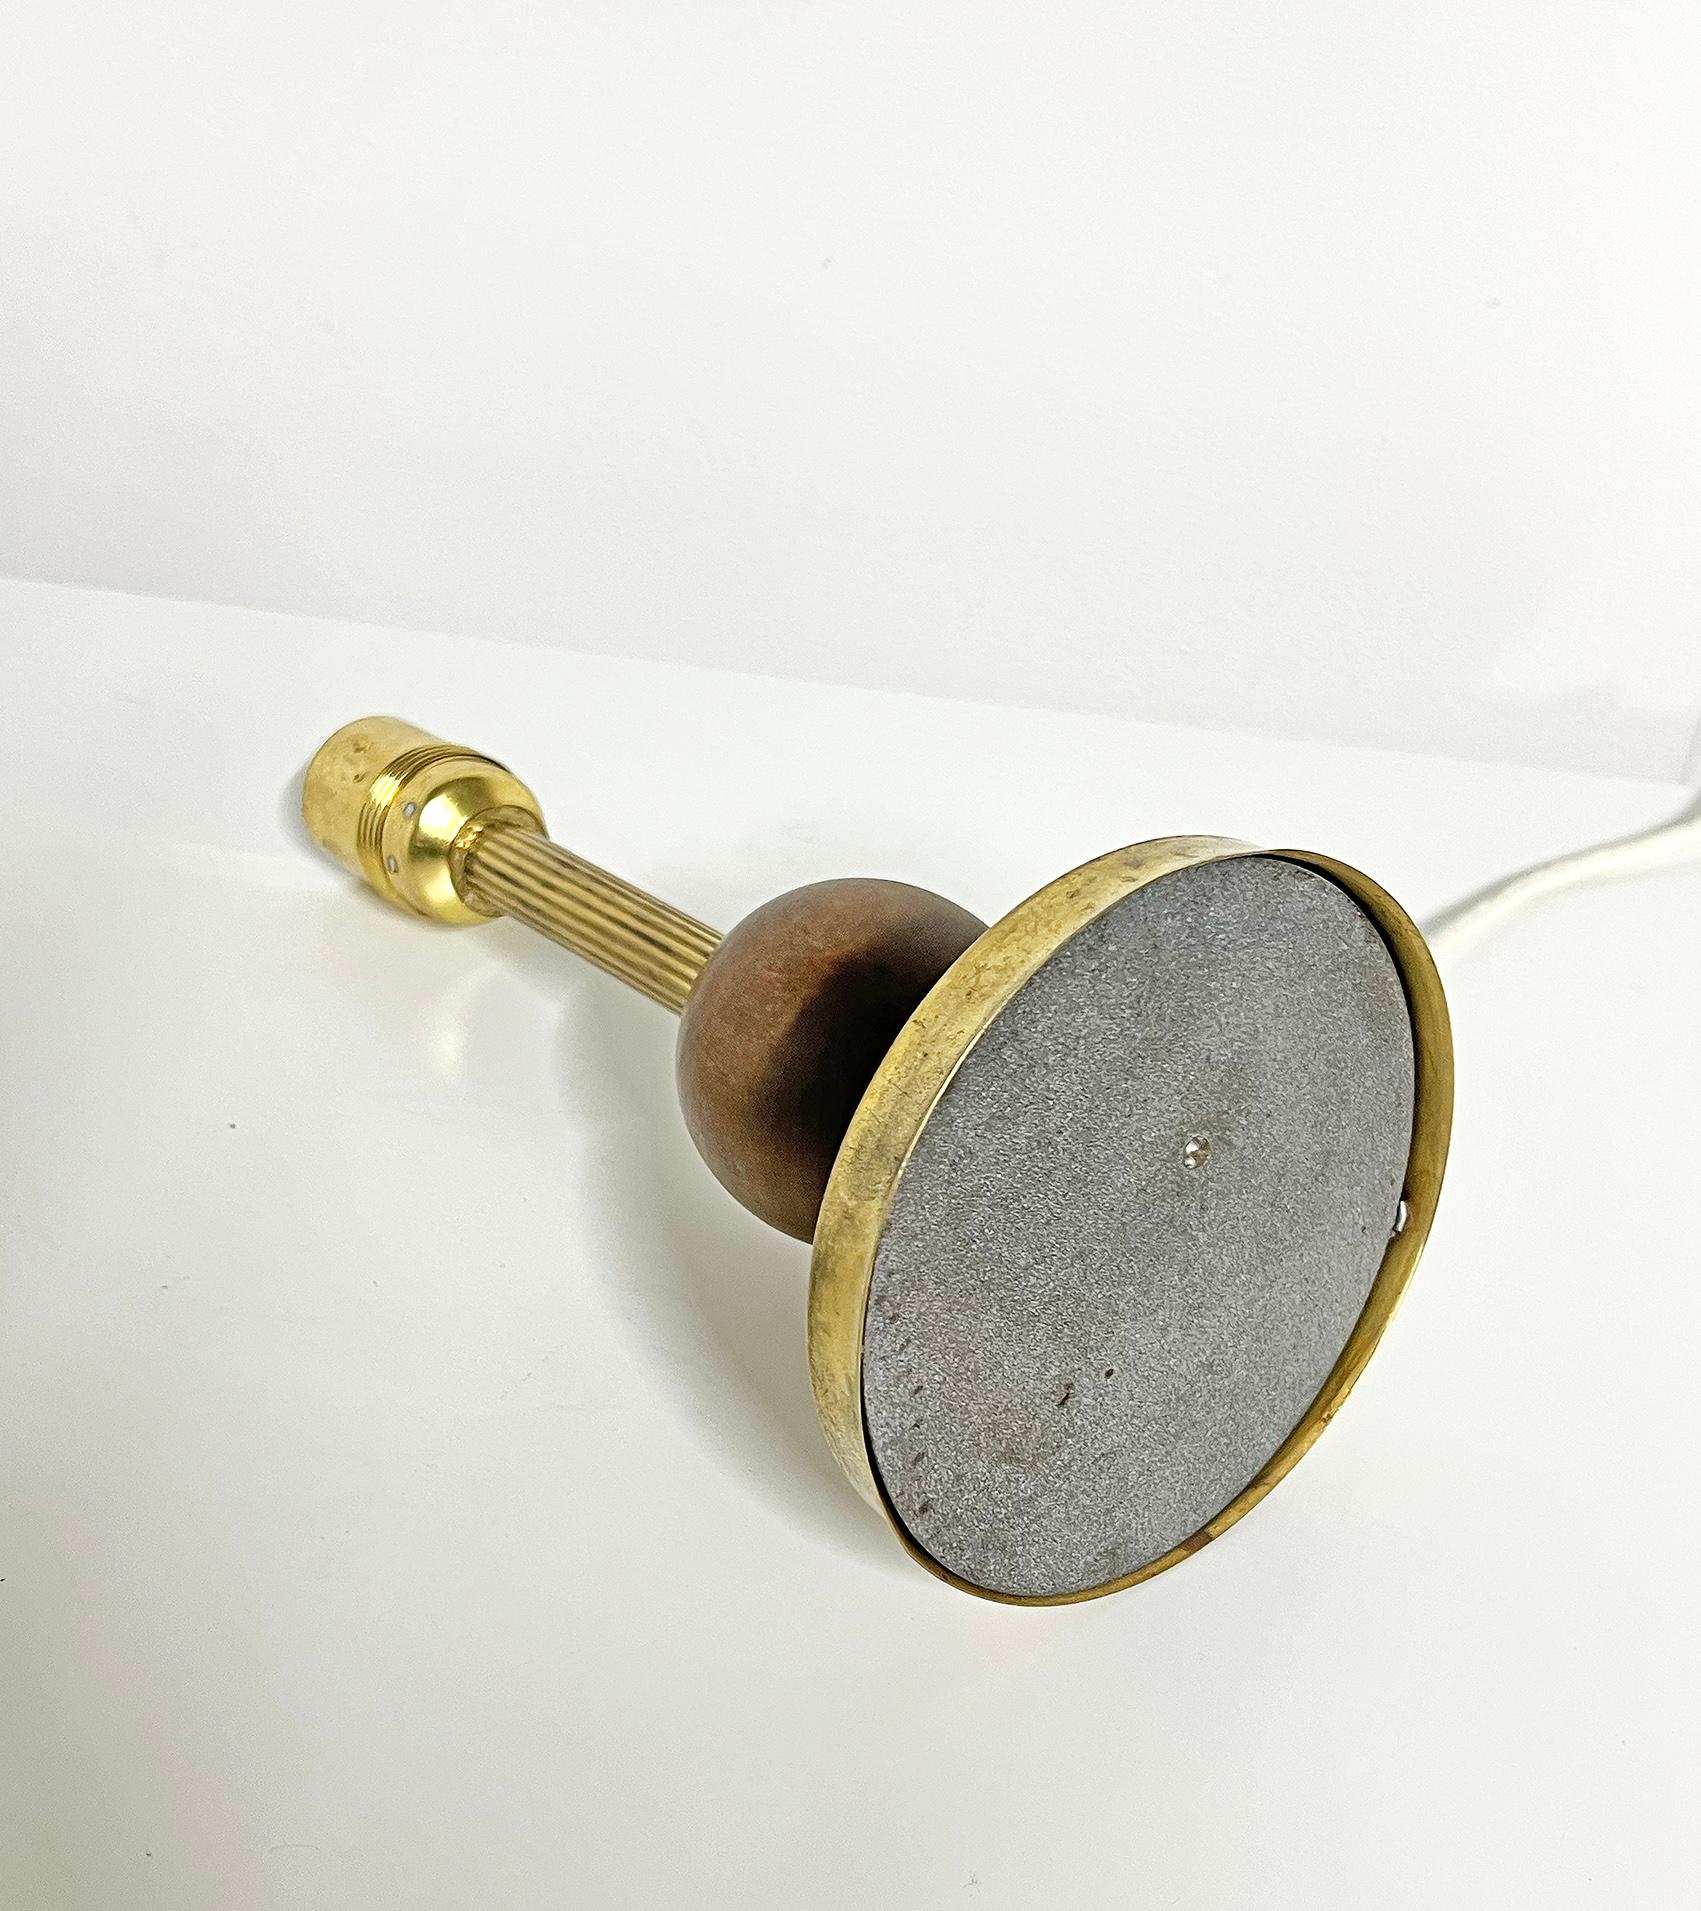 Scandinavian Modern Table Lamp In Brass and Wood ca 1960's For Sale 4